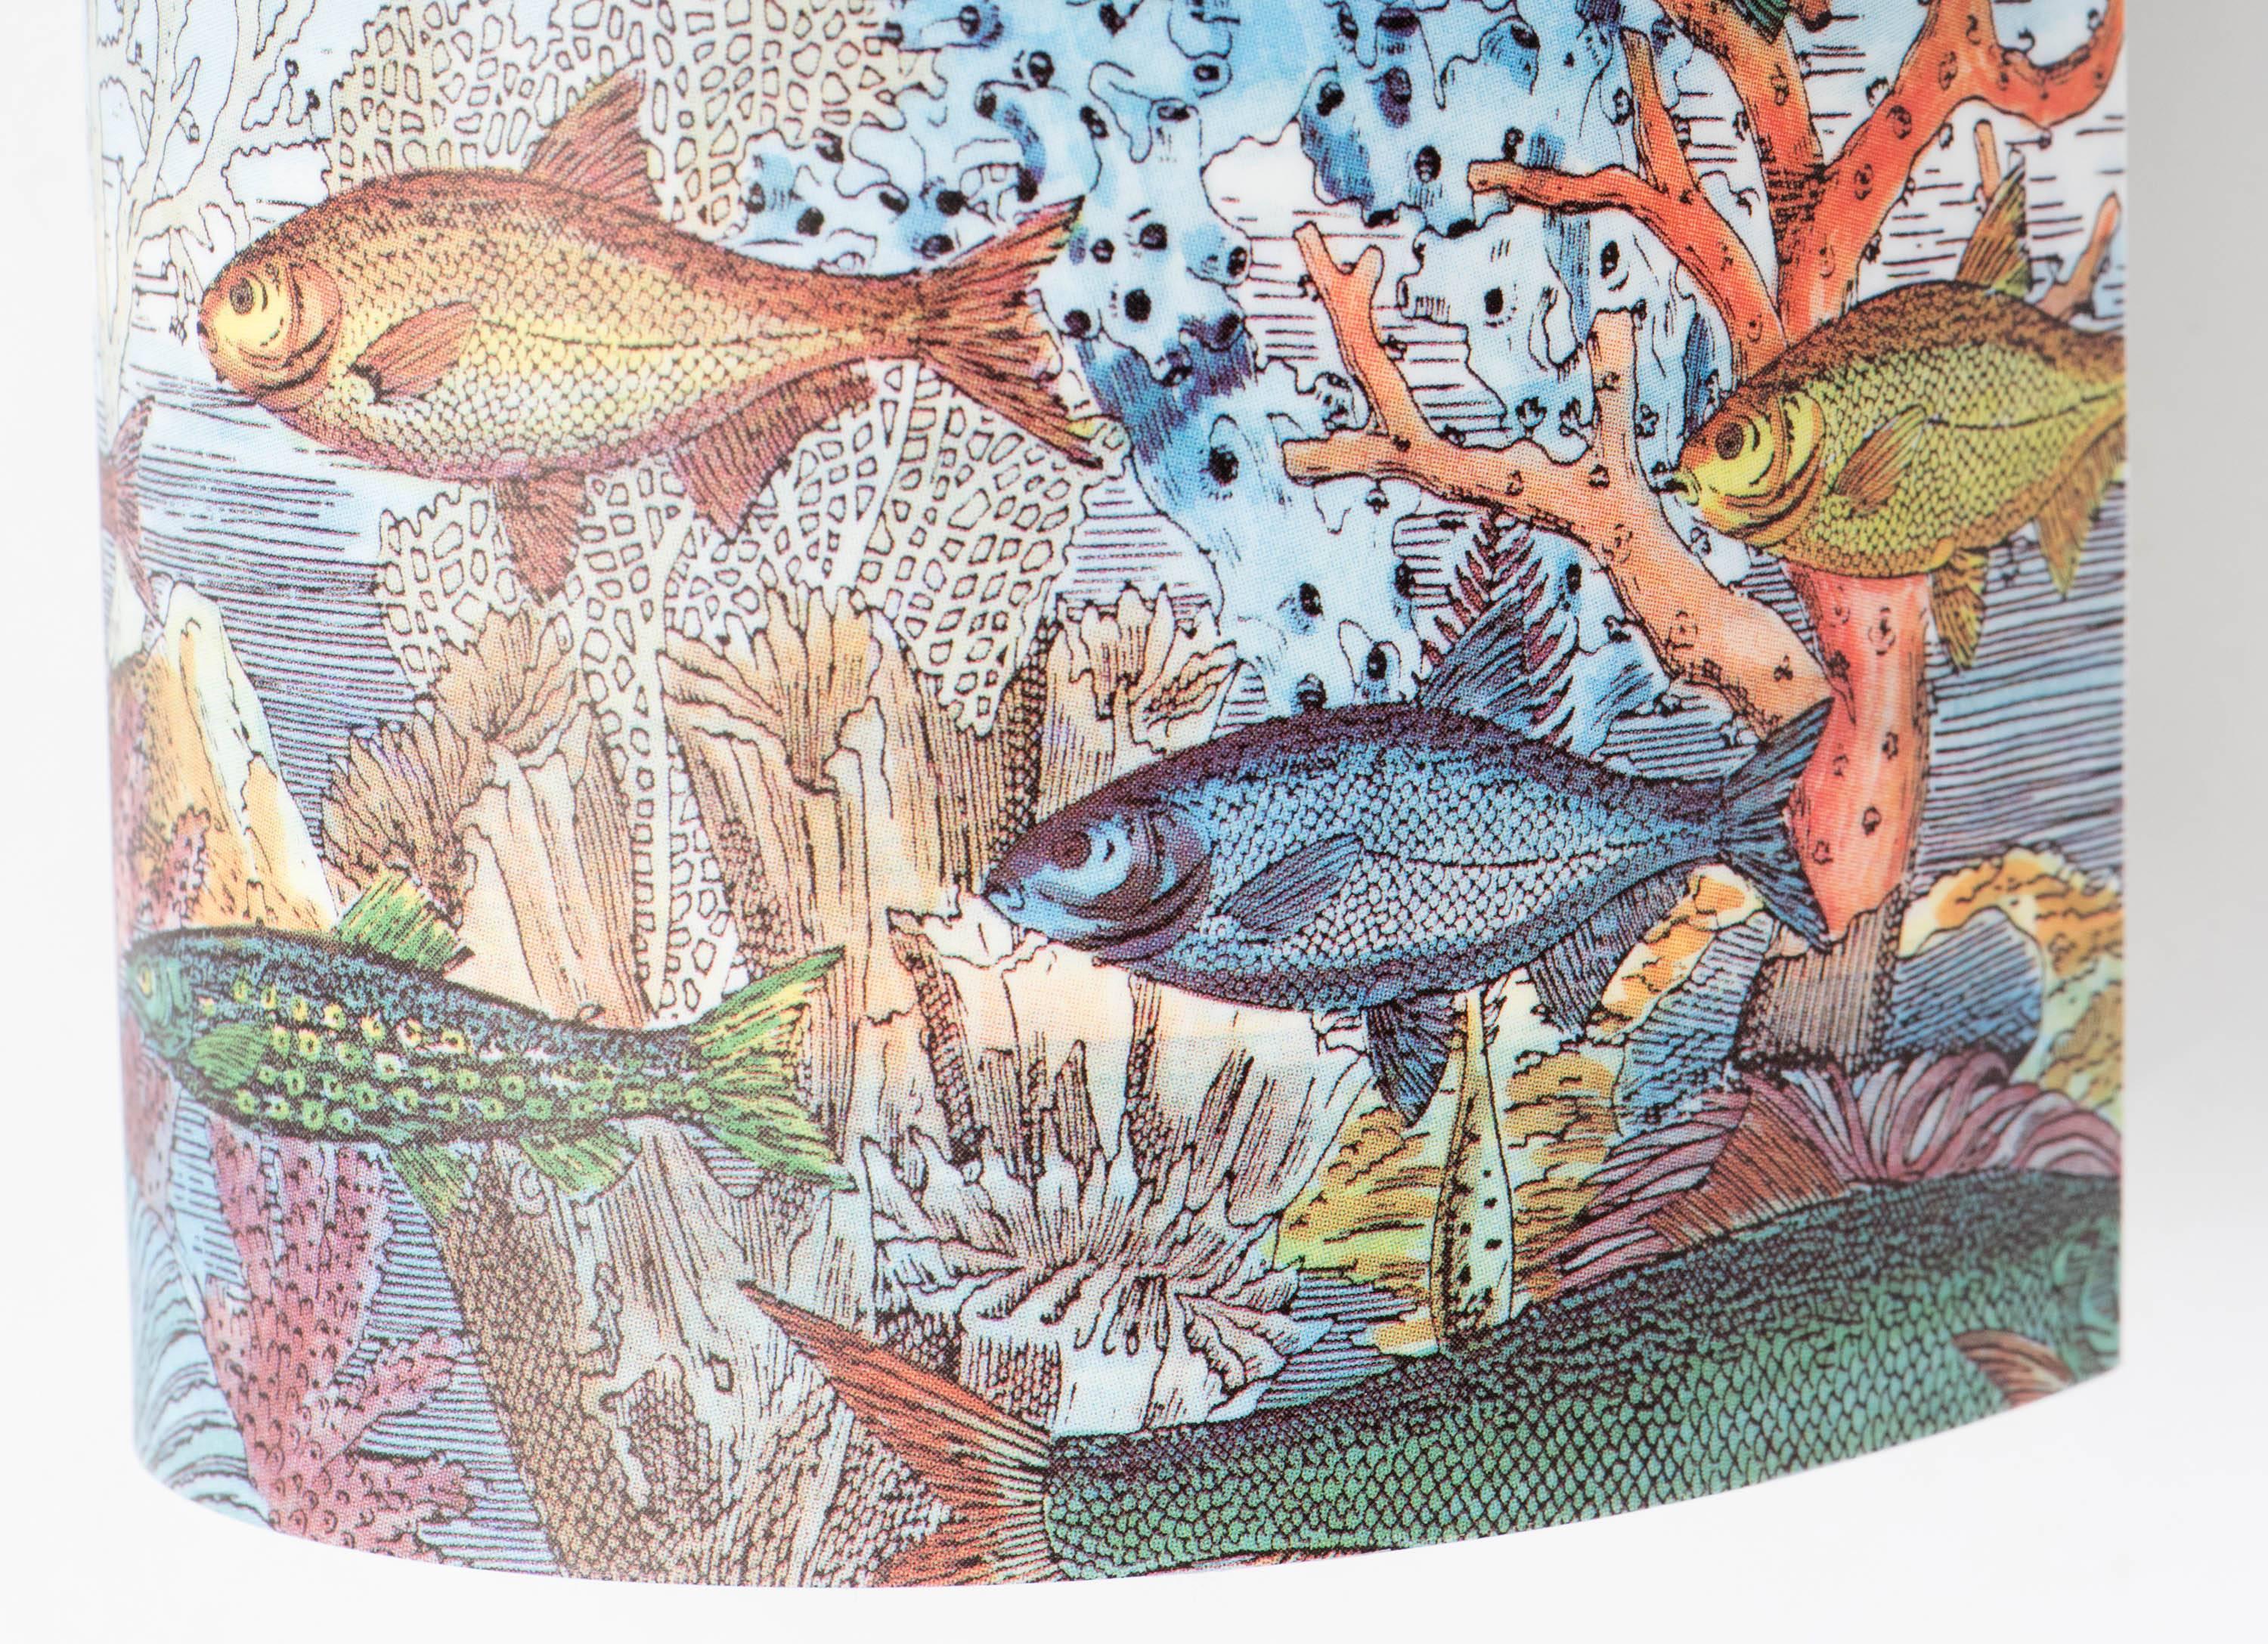 A pair of lamps by Barnaba Fornasetti. 
“Aquario medio” 
Printed and colored Perspex. 
Made by Fornasetti and Antonangeli, Paderno Dugano, 
Italy, circa 1995. 
Measures: 33 cm high x 12 cm wide x 16 cm deep.